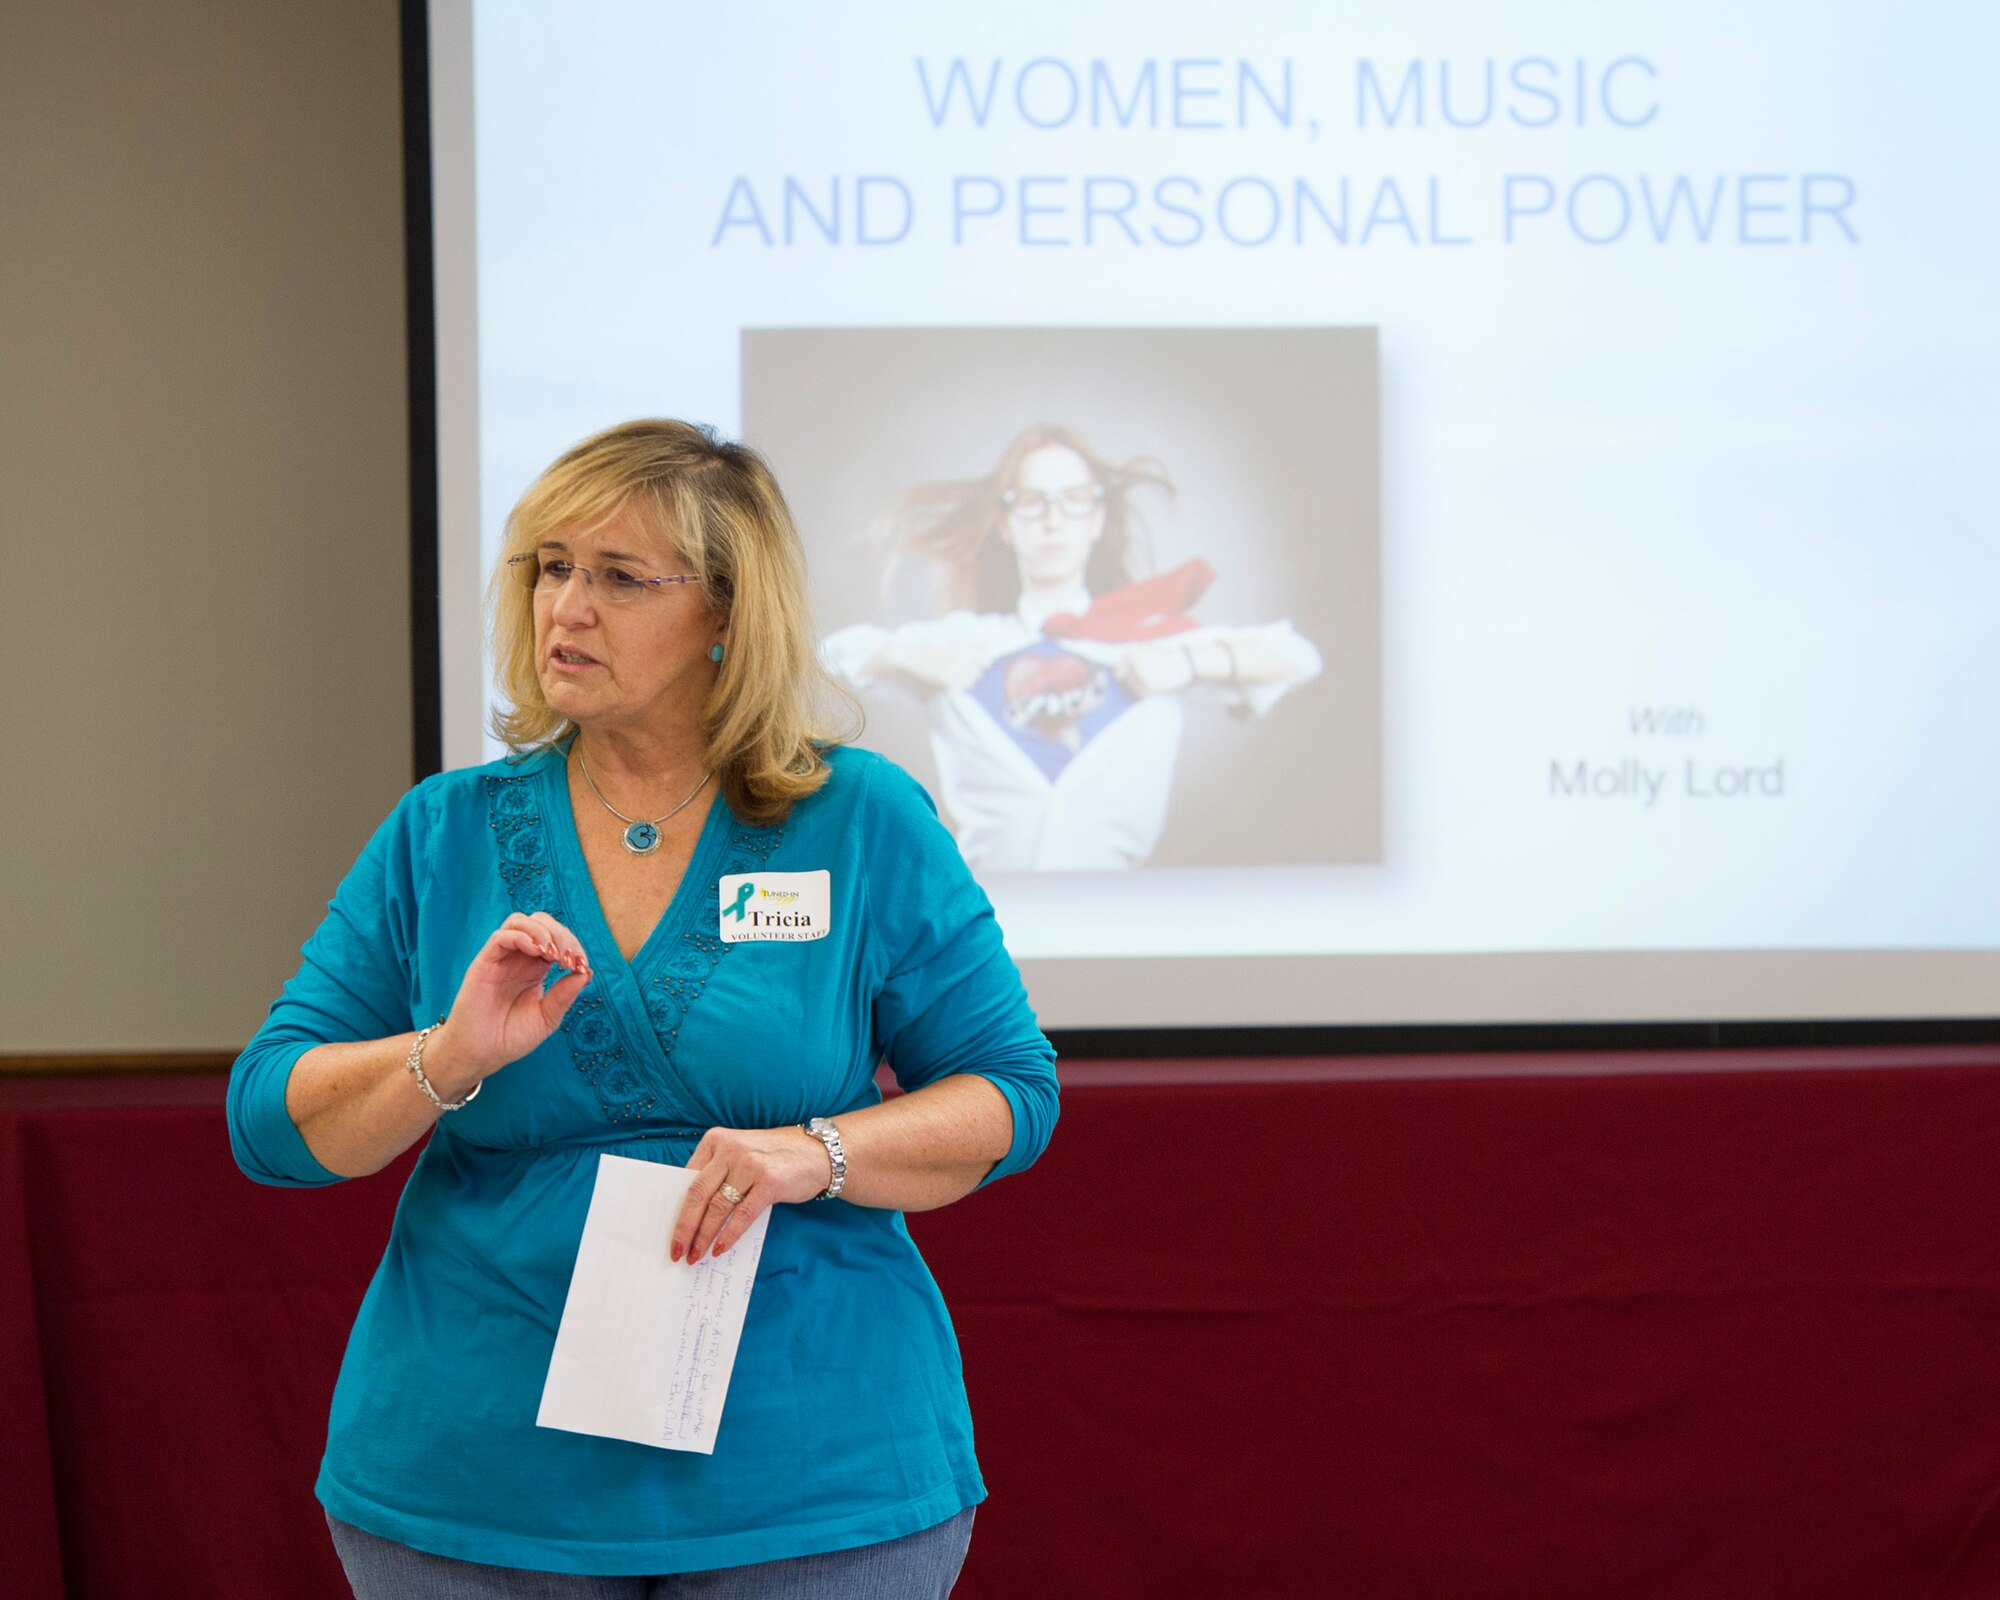 Patricia Gragg, 45th Space Wing Sexual Assault Response Coordinator, welcomes members of Team Patrick-Cape to a workshop geared toward women, music & personal power, Nov. 7, 2014, at Patrick Air Force Base, Fla. In conjunction with the workshop, Team Patrick-Cape was authorized to wear denim jeans in observance of Denim Day, to recognize the importance of preventing sexual assault. (U.S. Air Force photo/Matthew Jurgens) 